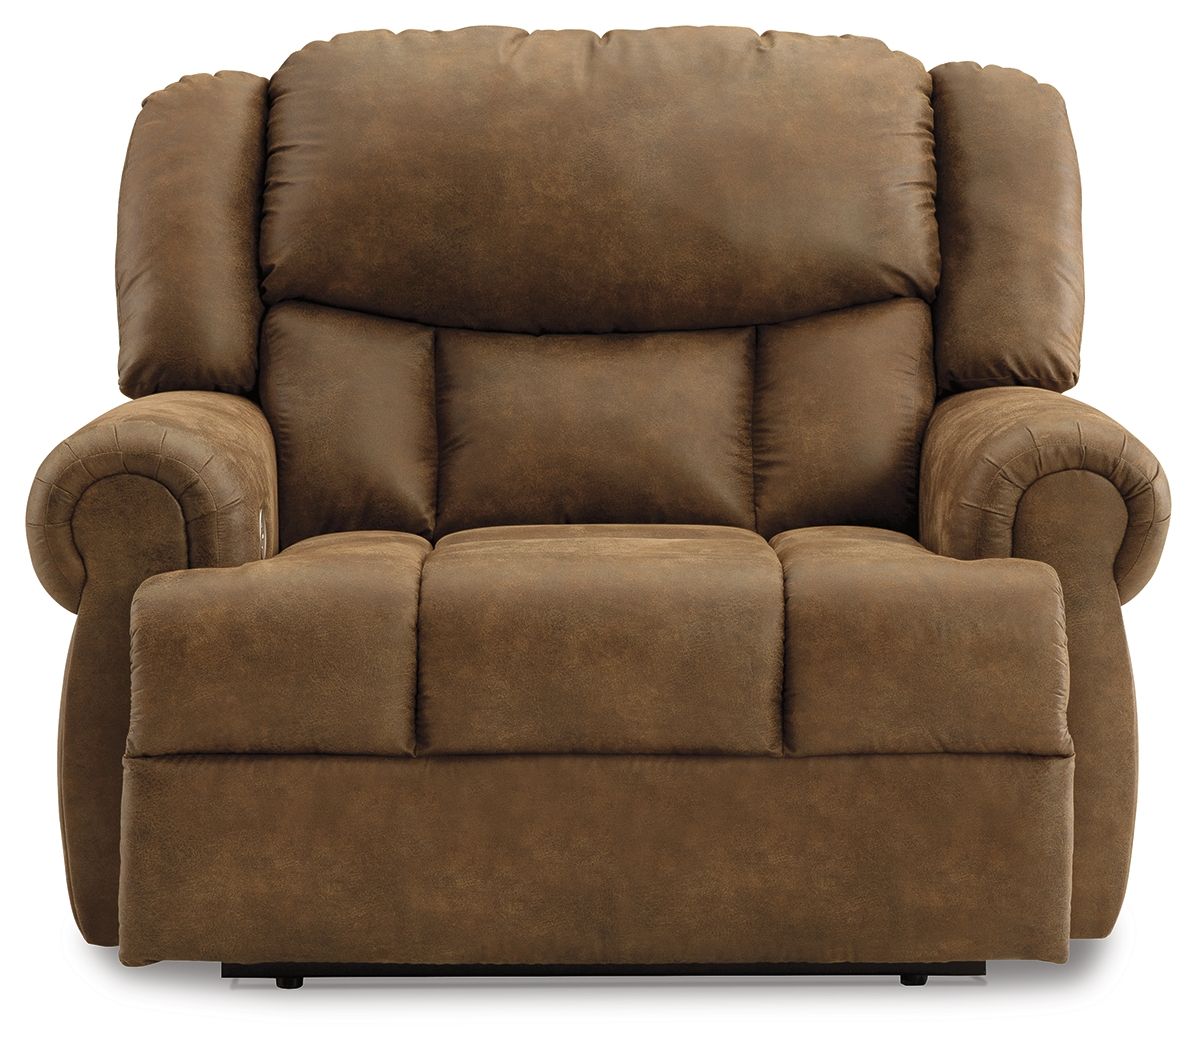 Boothbay - Wide Seat Recliner - Tony's Home Furnishings